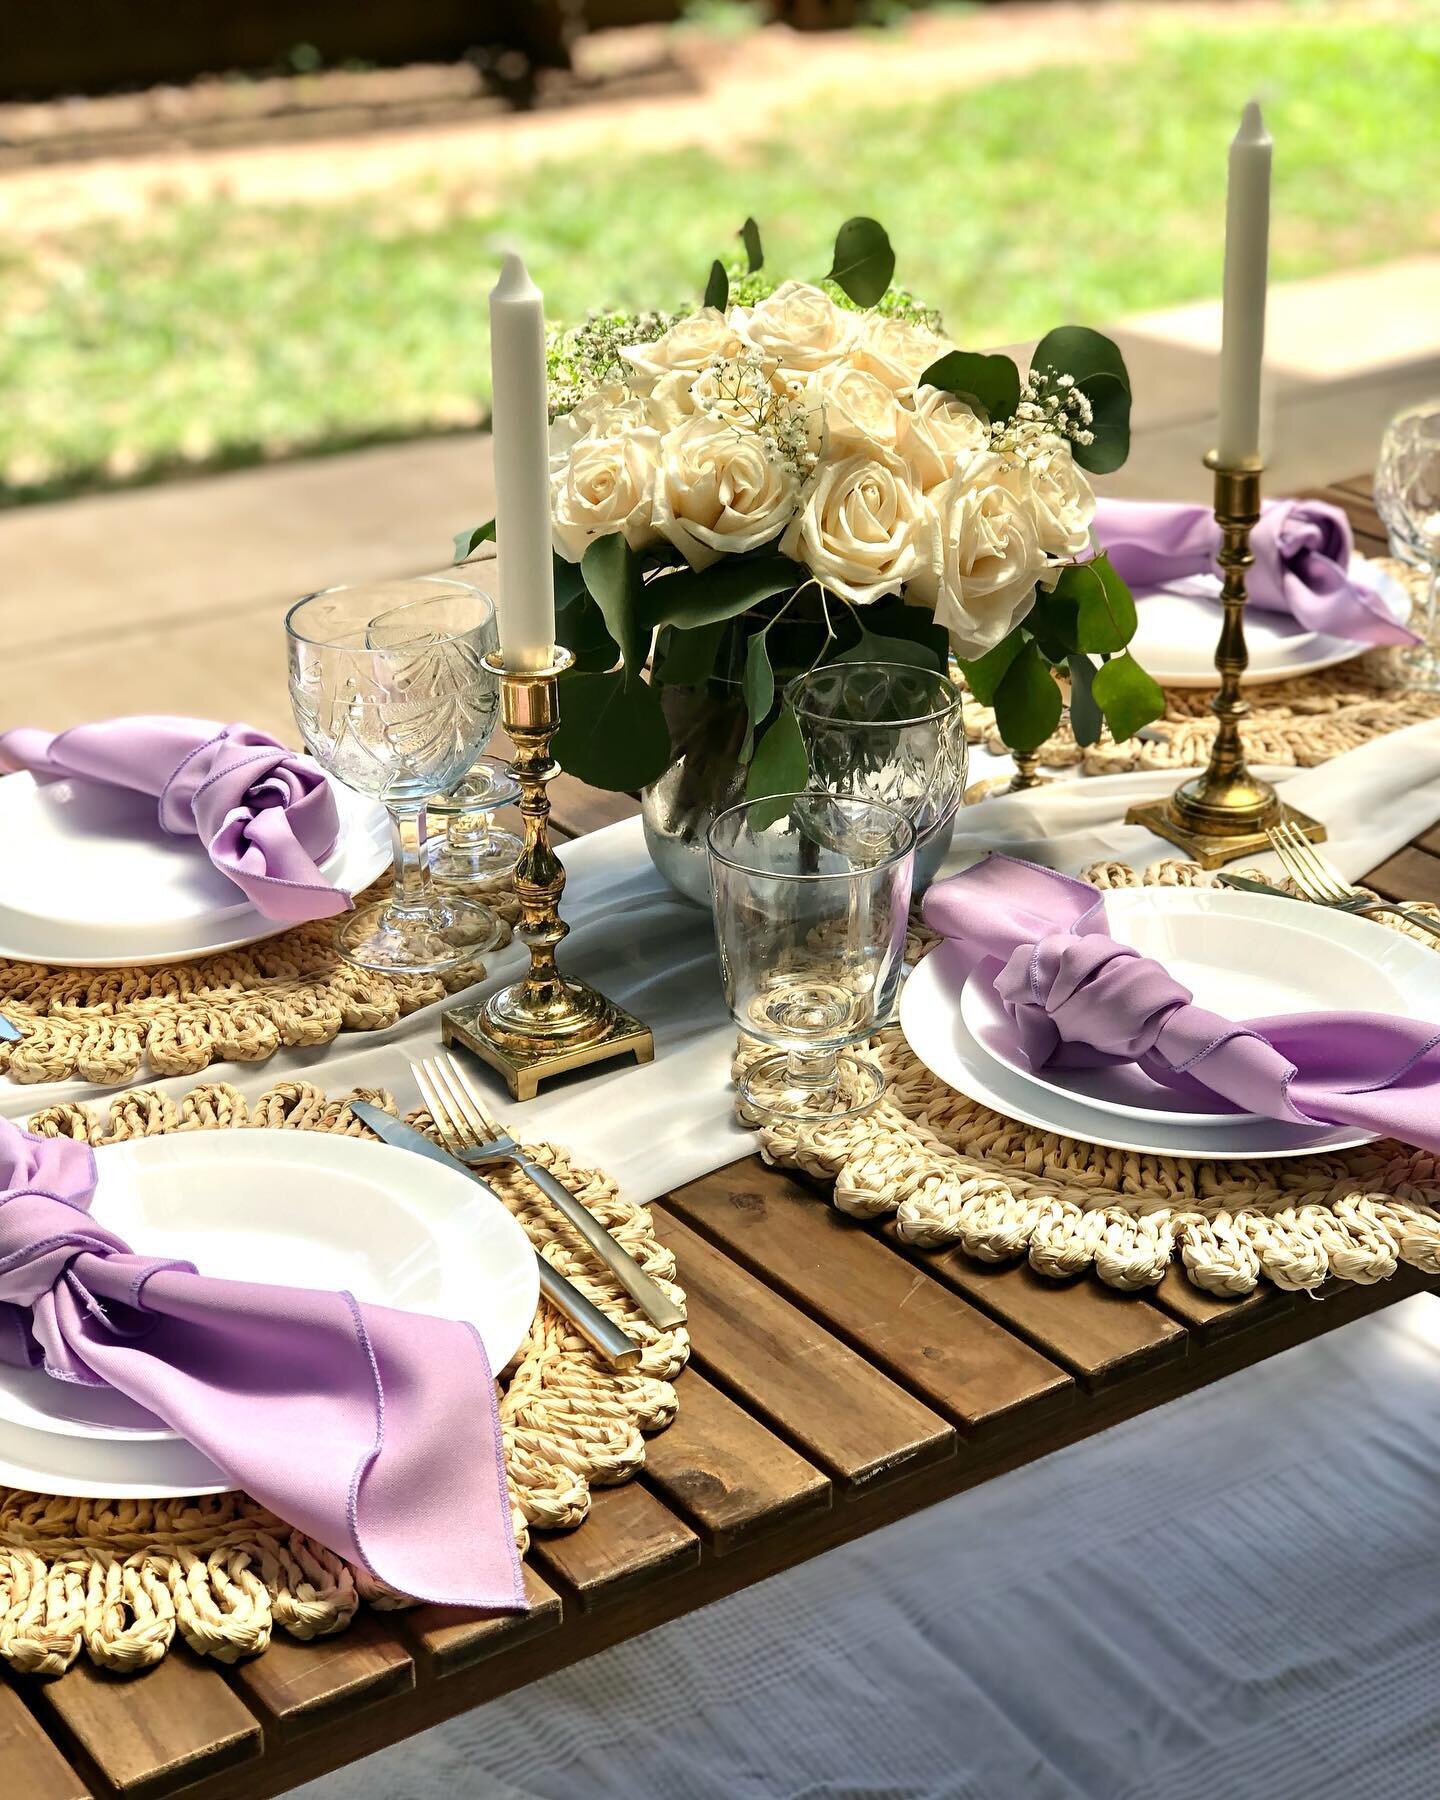 The category is purple! It&rsquo;s giving us luxury for sure!💕💕
.
.
.
.
.

#thegatheringpicnicco&nbsp;#clt&nbsp;#cltpicnic&nbsp;#cltpicnics&nbsp;#charlottedate&nbsp;#charlottedatenight&nbsp;#charlottepicnic&nbsp;#charlottepicnics&nbsp;#charlottelux